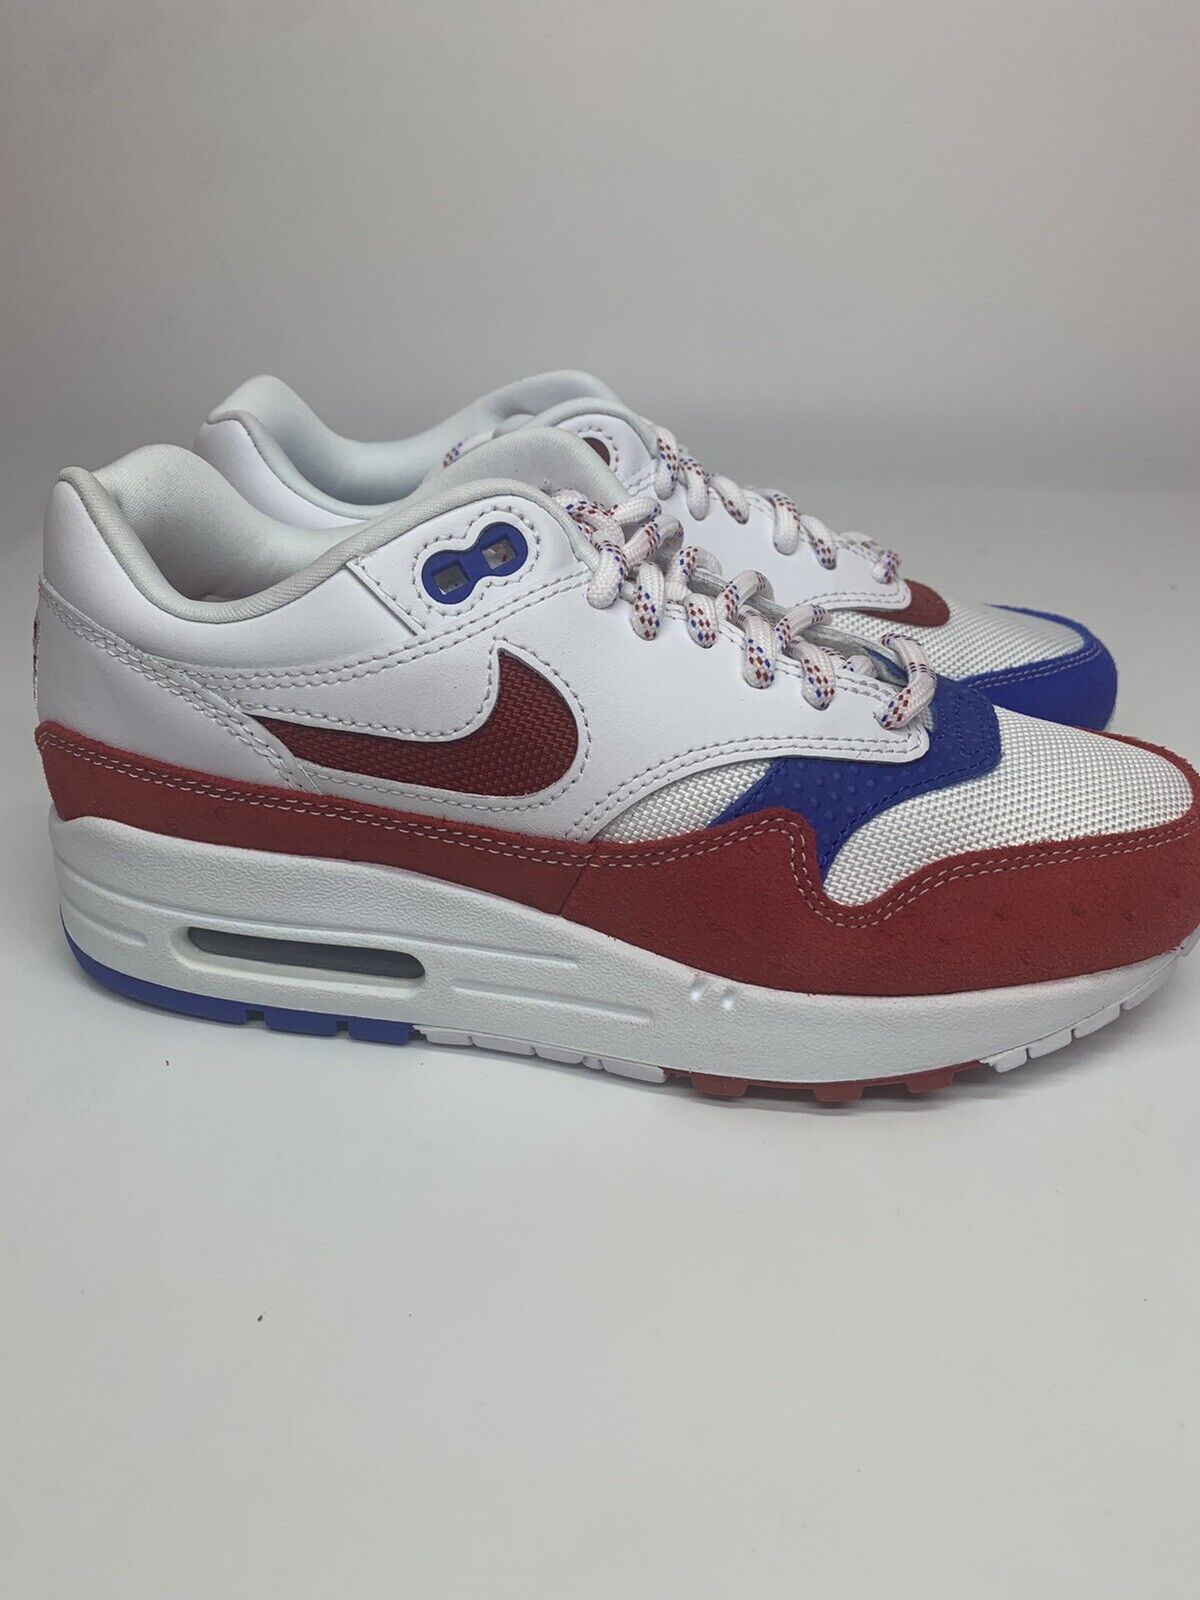 Size 4 - Nike Air Max 1 Premium Puerto Rico 2019 for sale online 